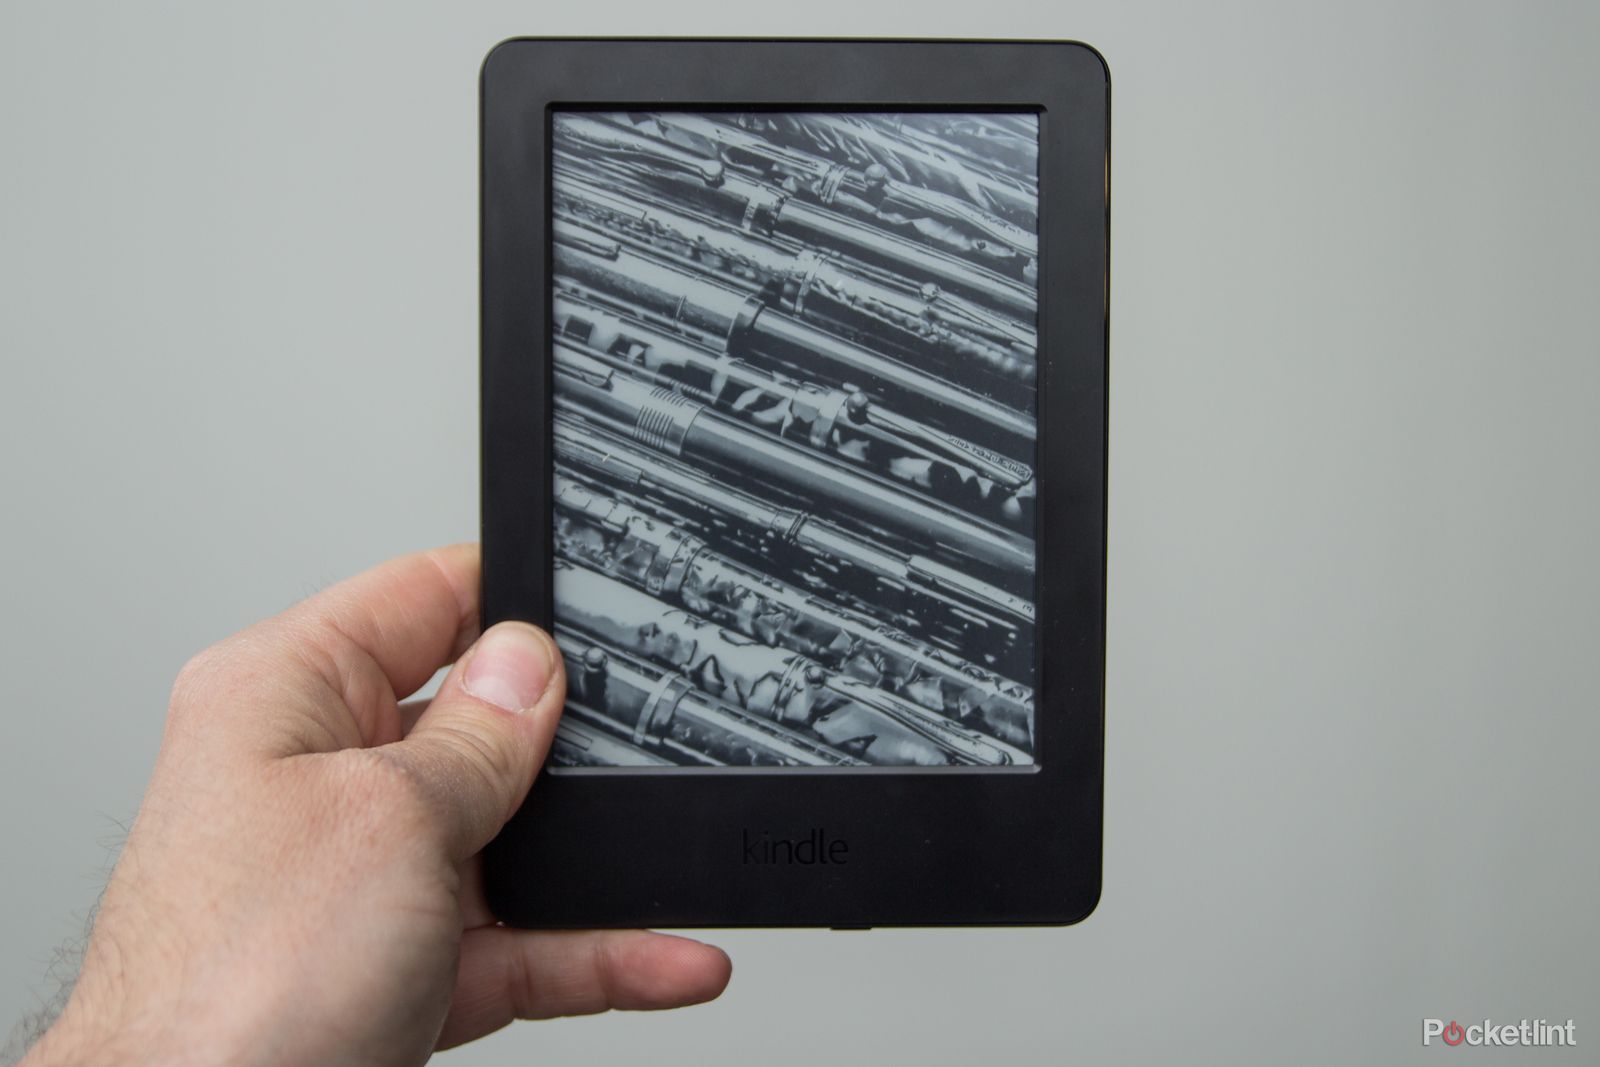 amazon kindle a brief history from the original kindle onwards image 7